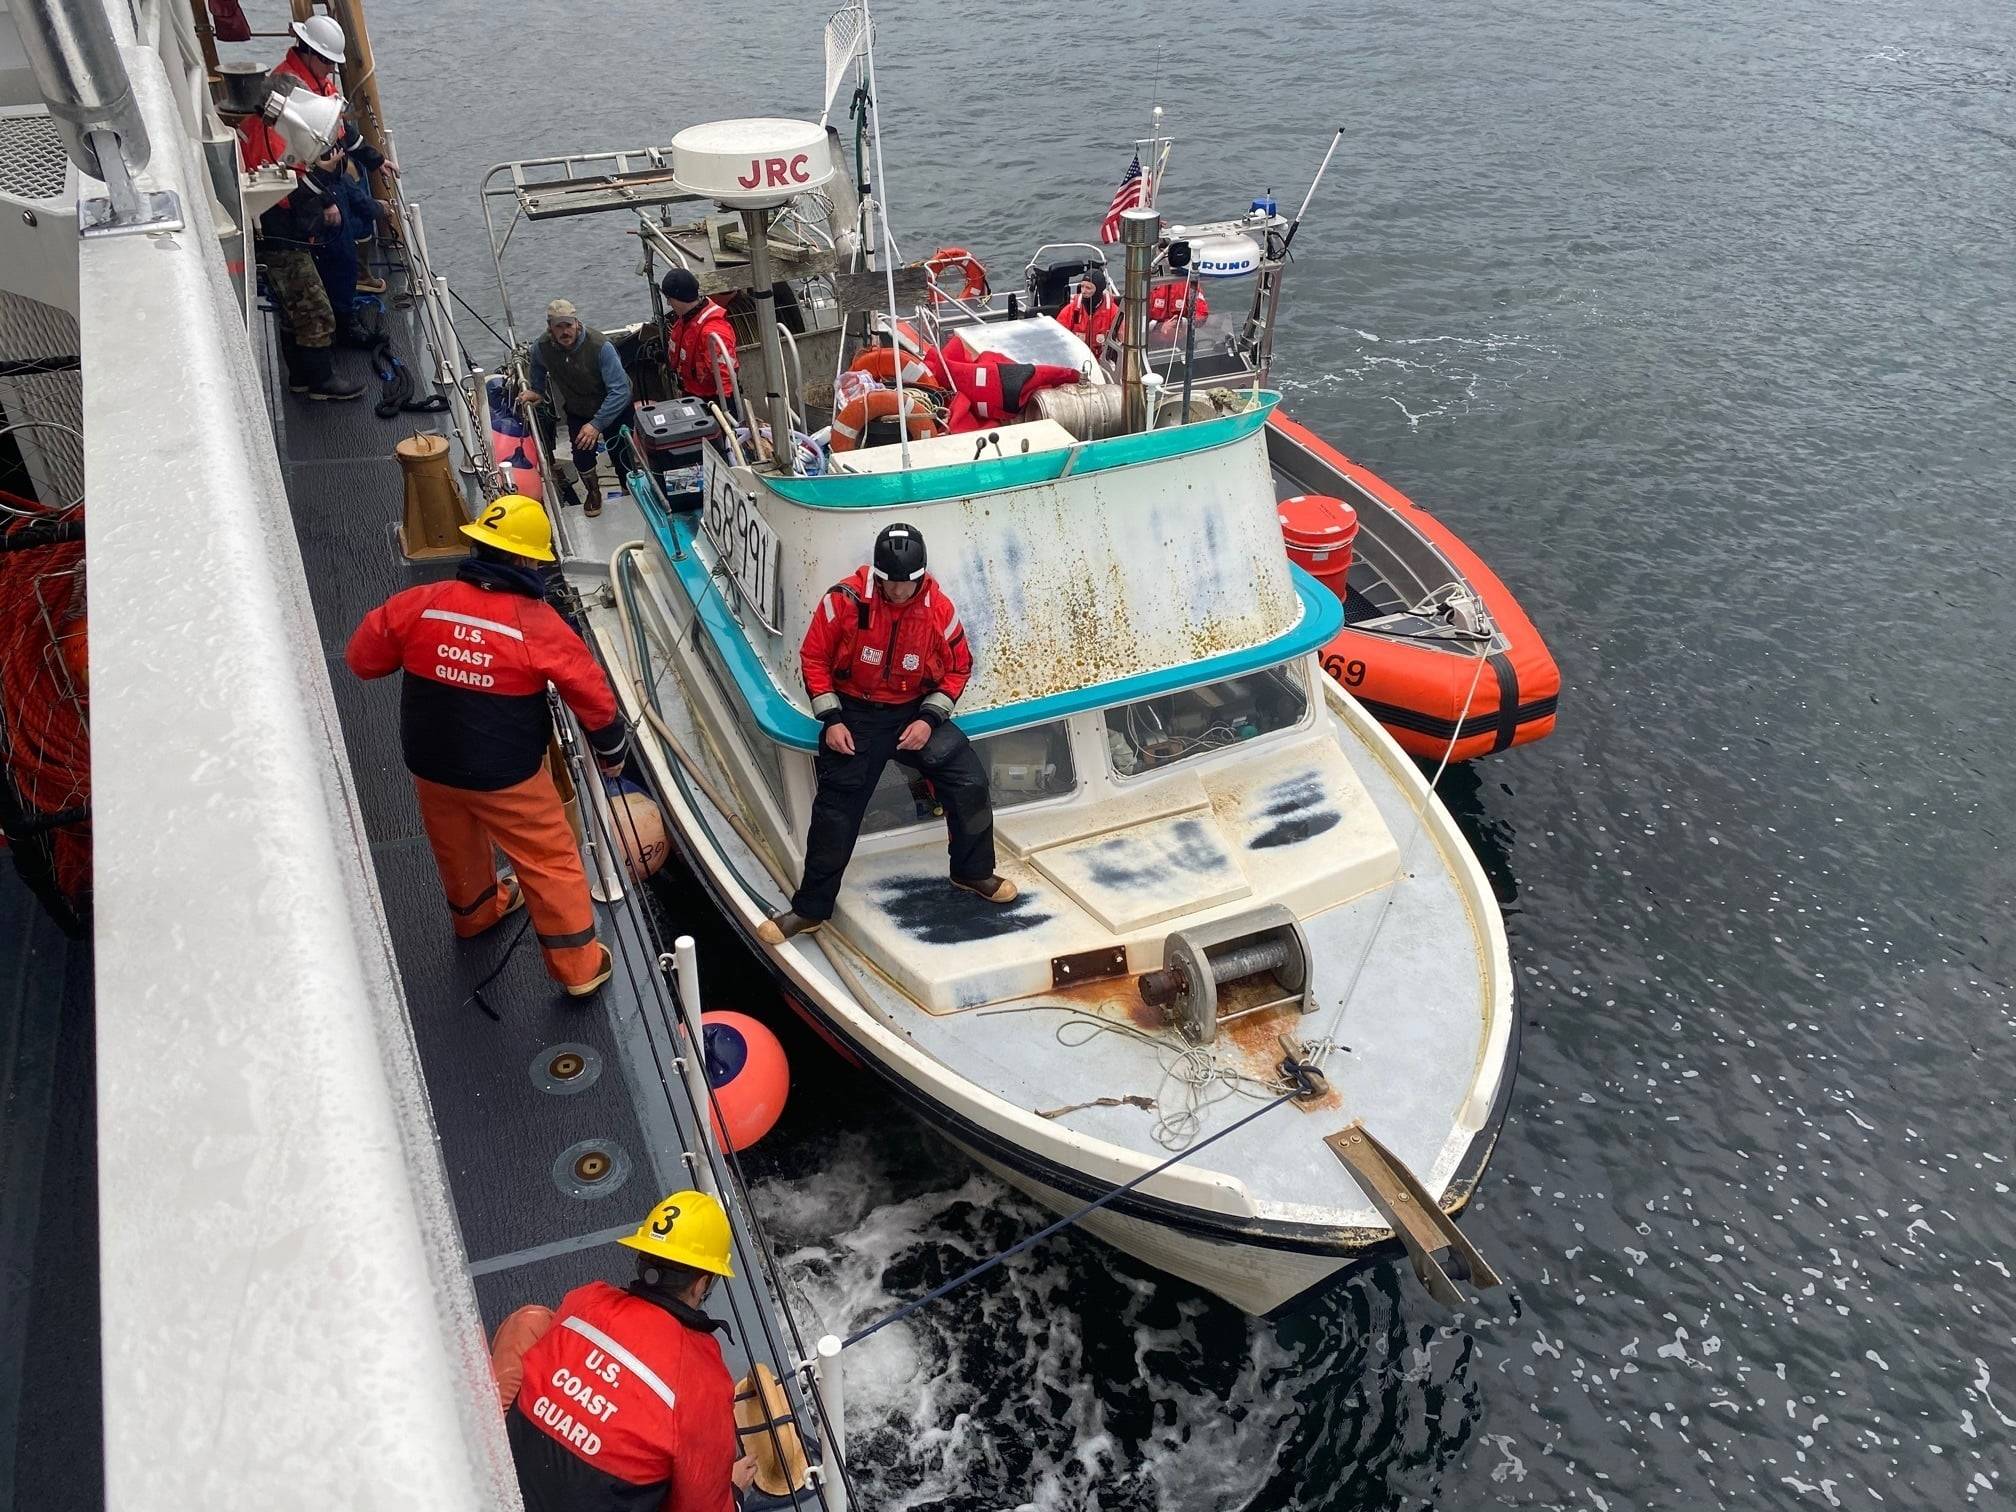 Coast Guardsmen aboard the cutter USCGC John McCormick rescued two people off the fishing vessel Reluctant near Hoonah after it grounded Tuesday morning, Sept. 22, 2020. (Courtesy photo / U.S. Coast Guard)